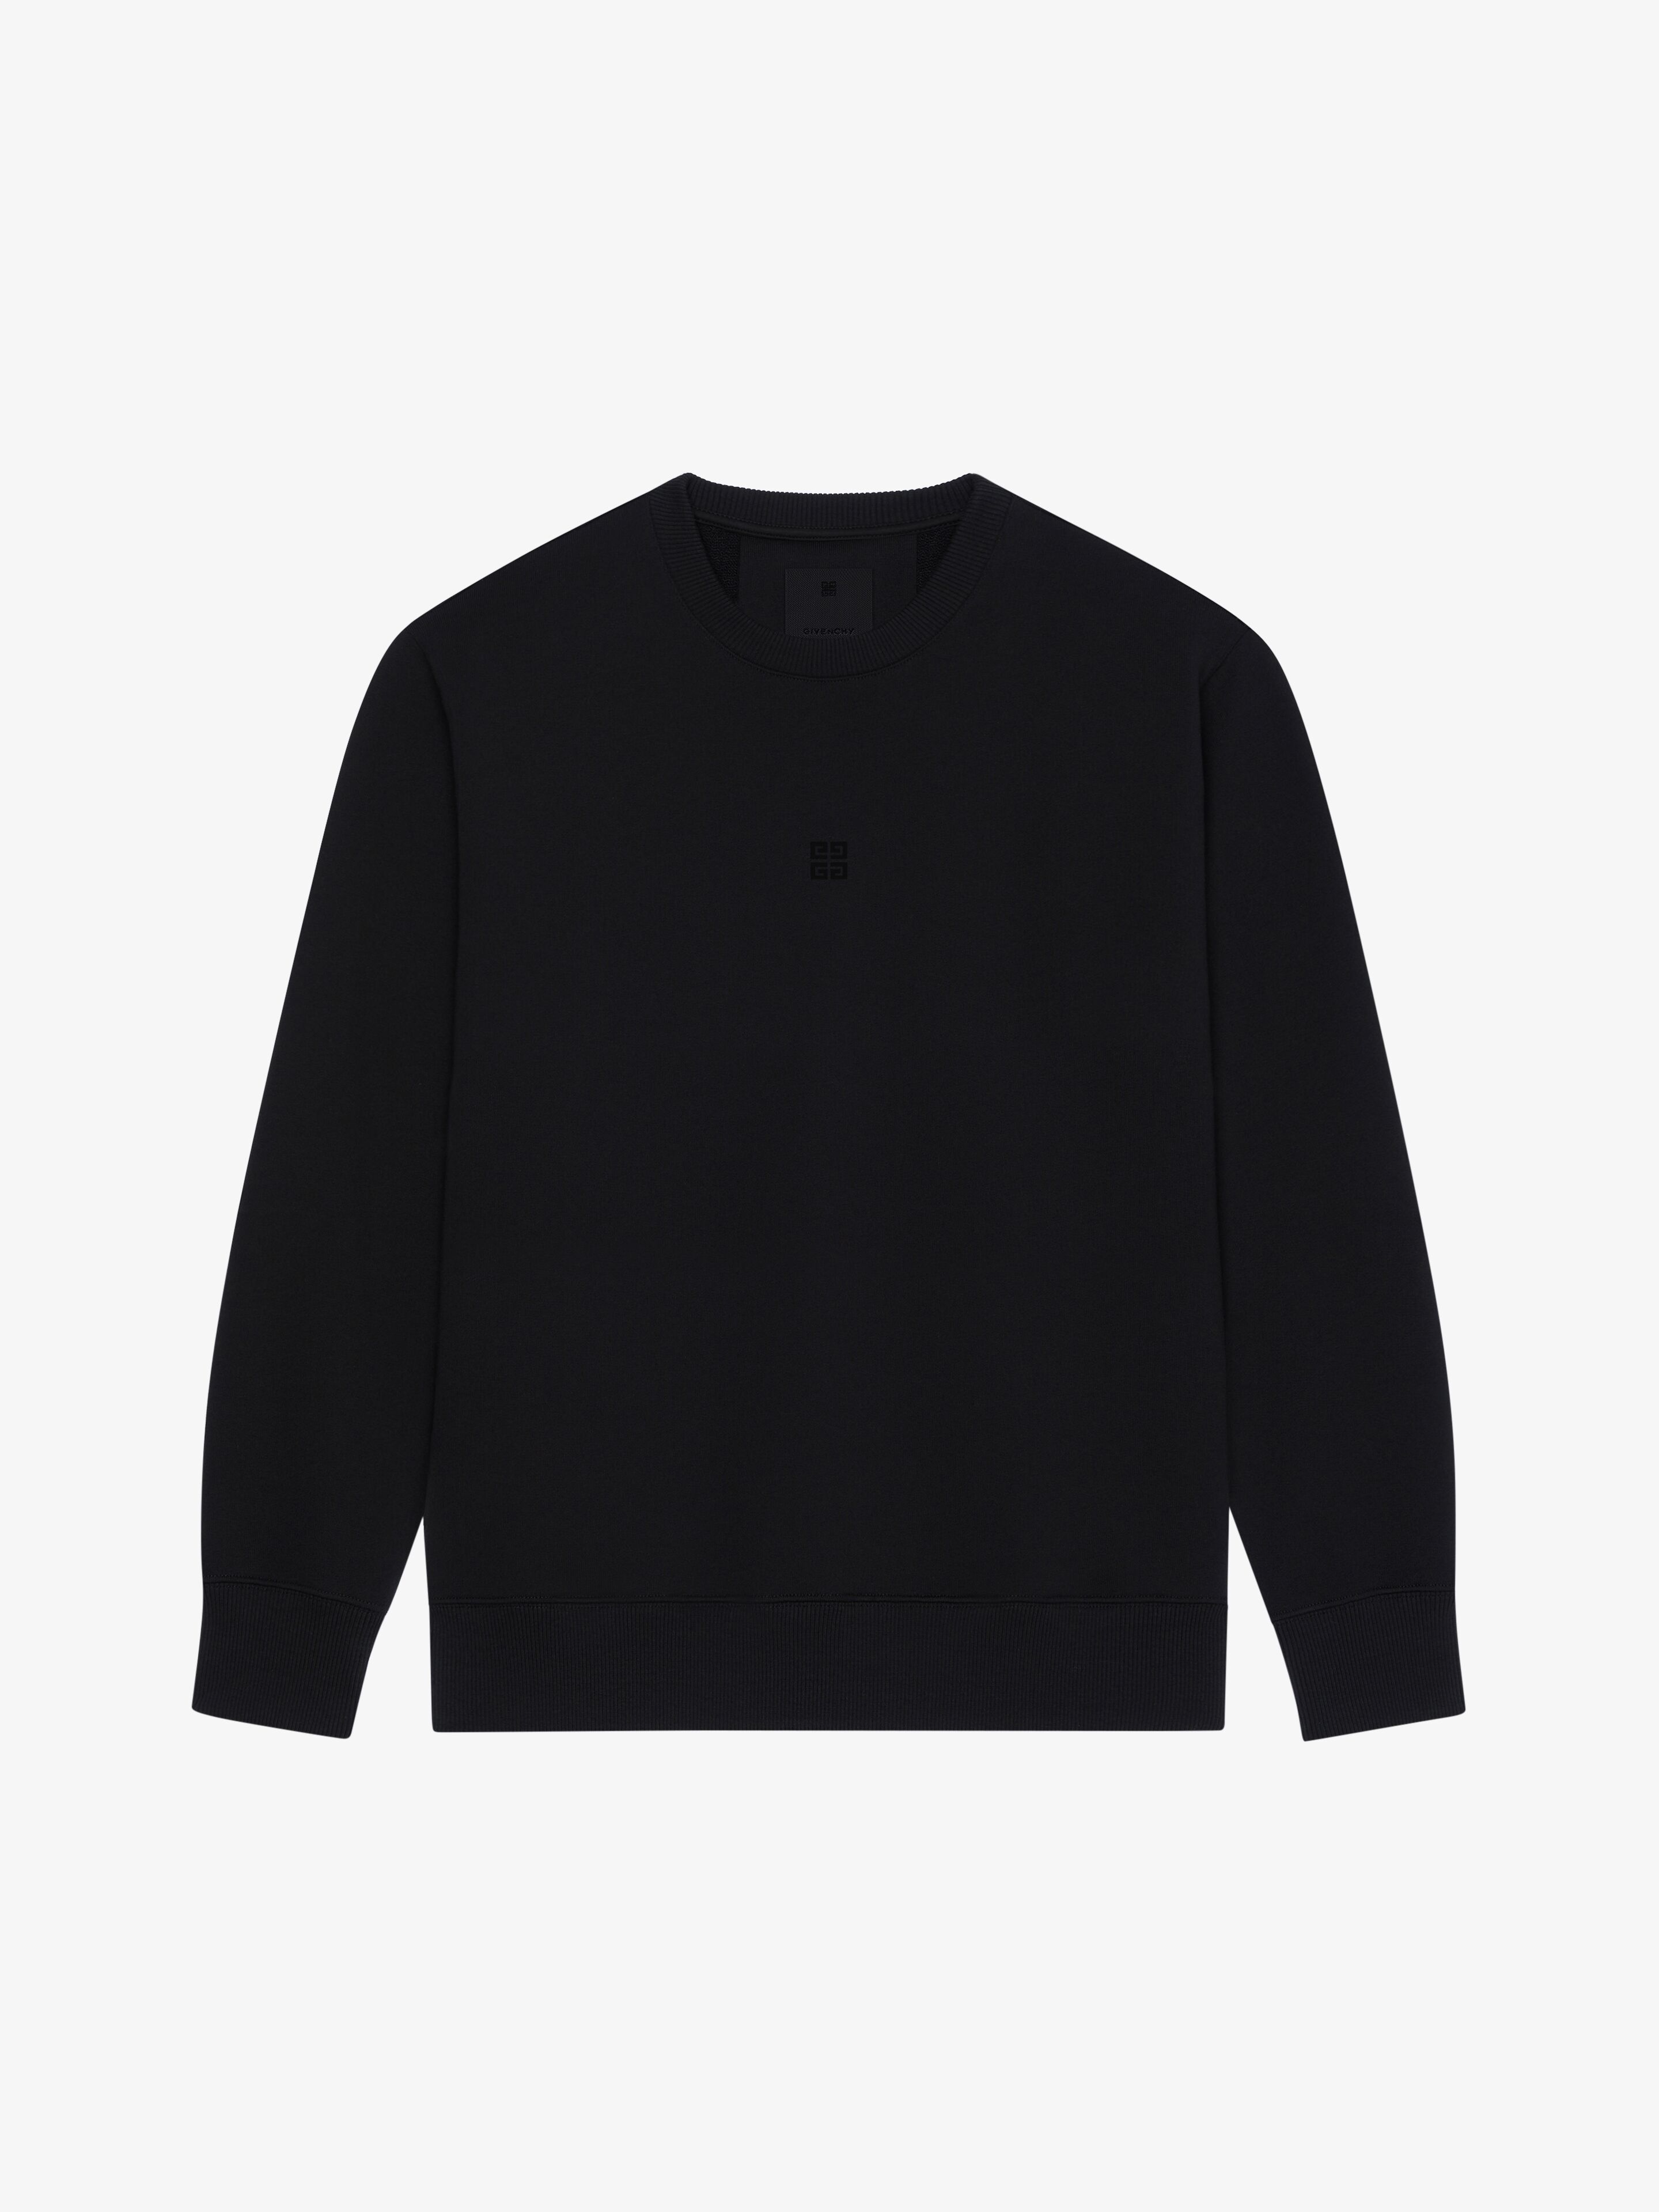 Givenchy Men's Slim Fit Sweatshirt In Embroidered Felpa In Black